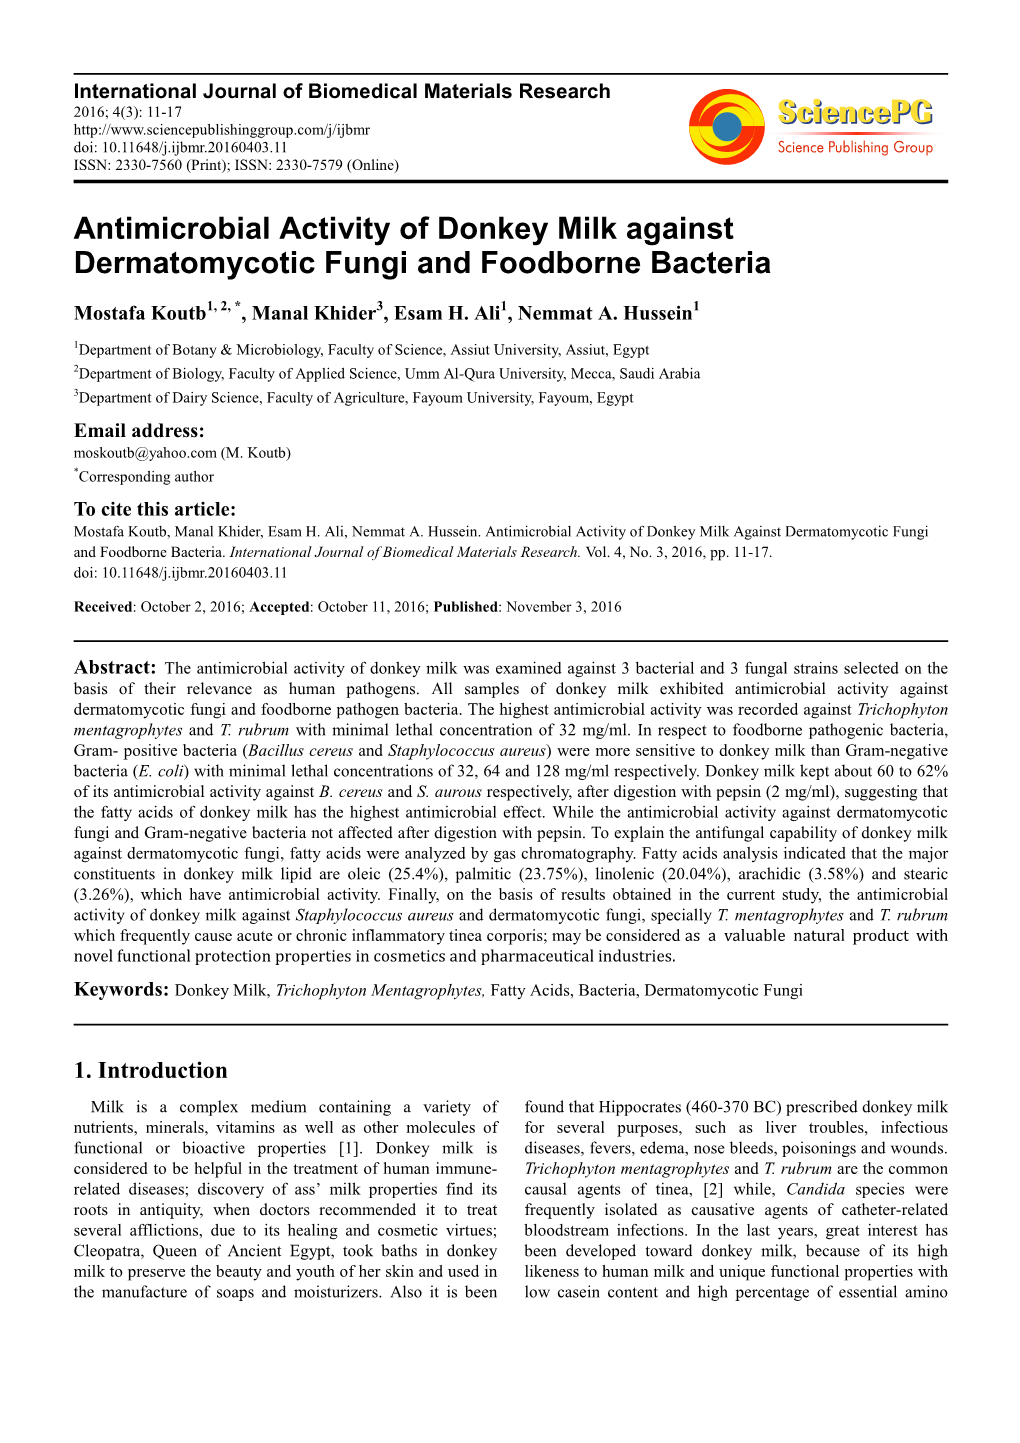 Antimicrobial Activity of Donkey Milk Against Dermatomycotic Fungi and Foodborne Bacteria